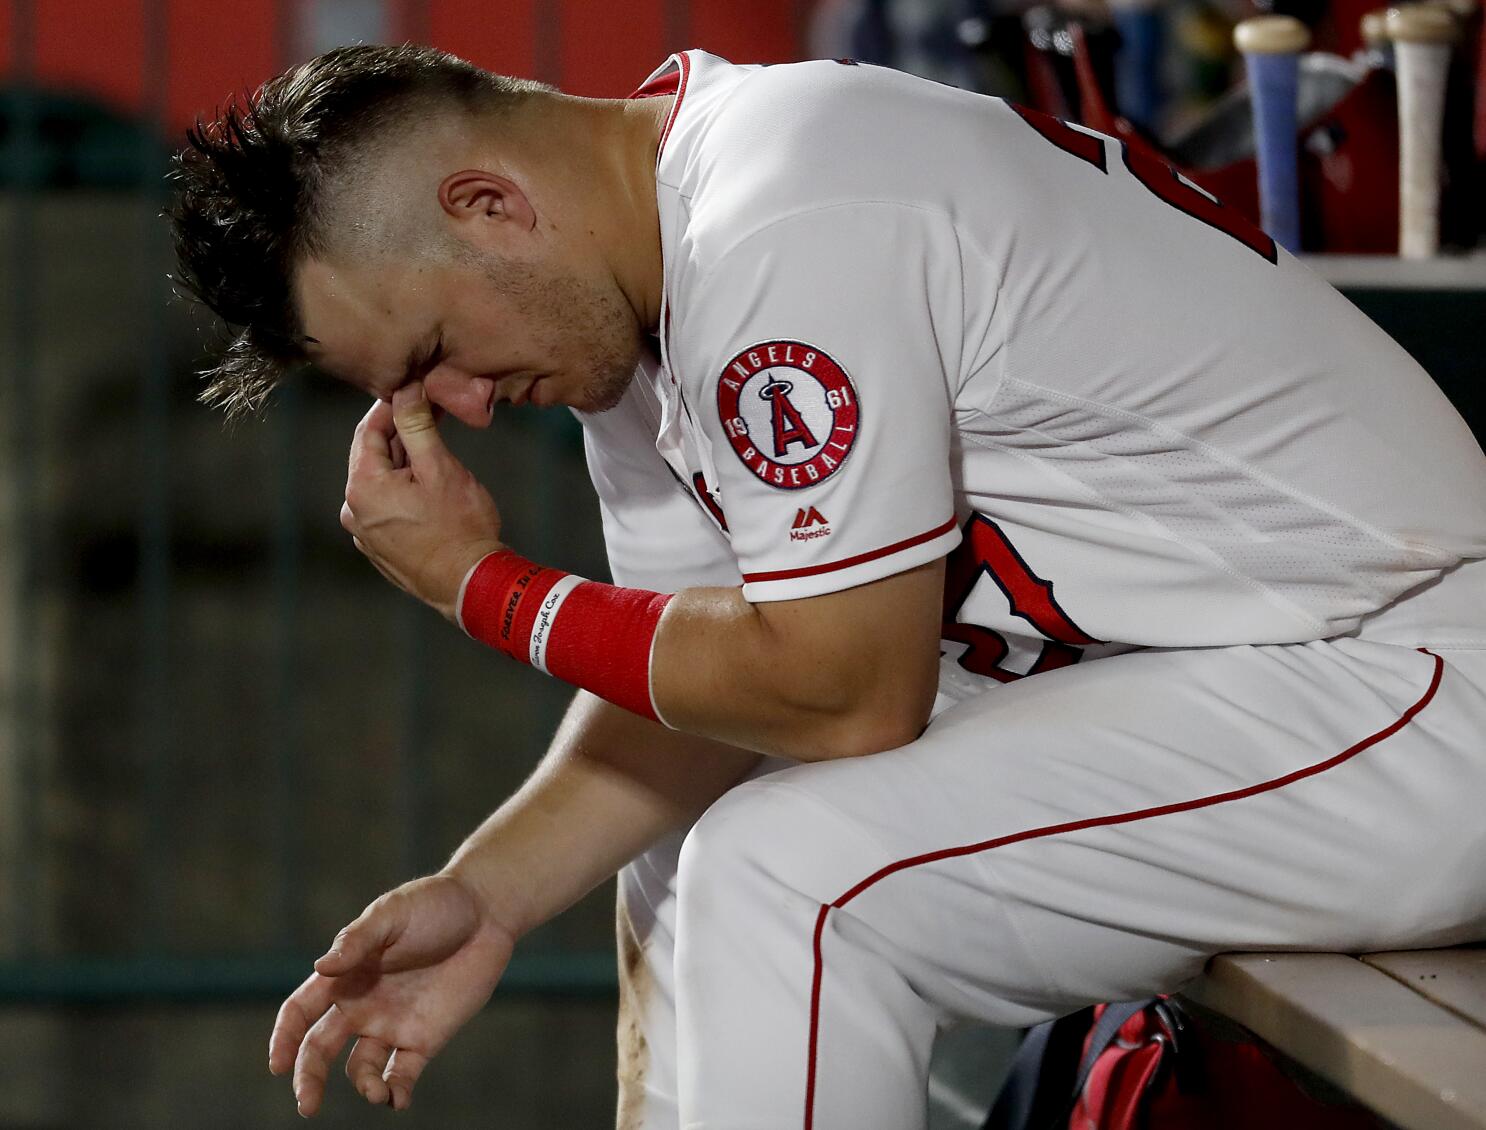 Tyler Skaggs death: Toxicology report says Los Angeles Angels